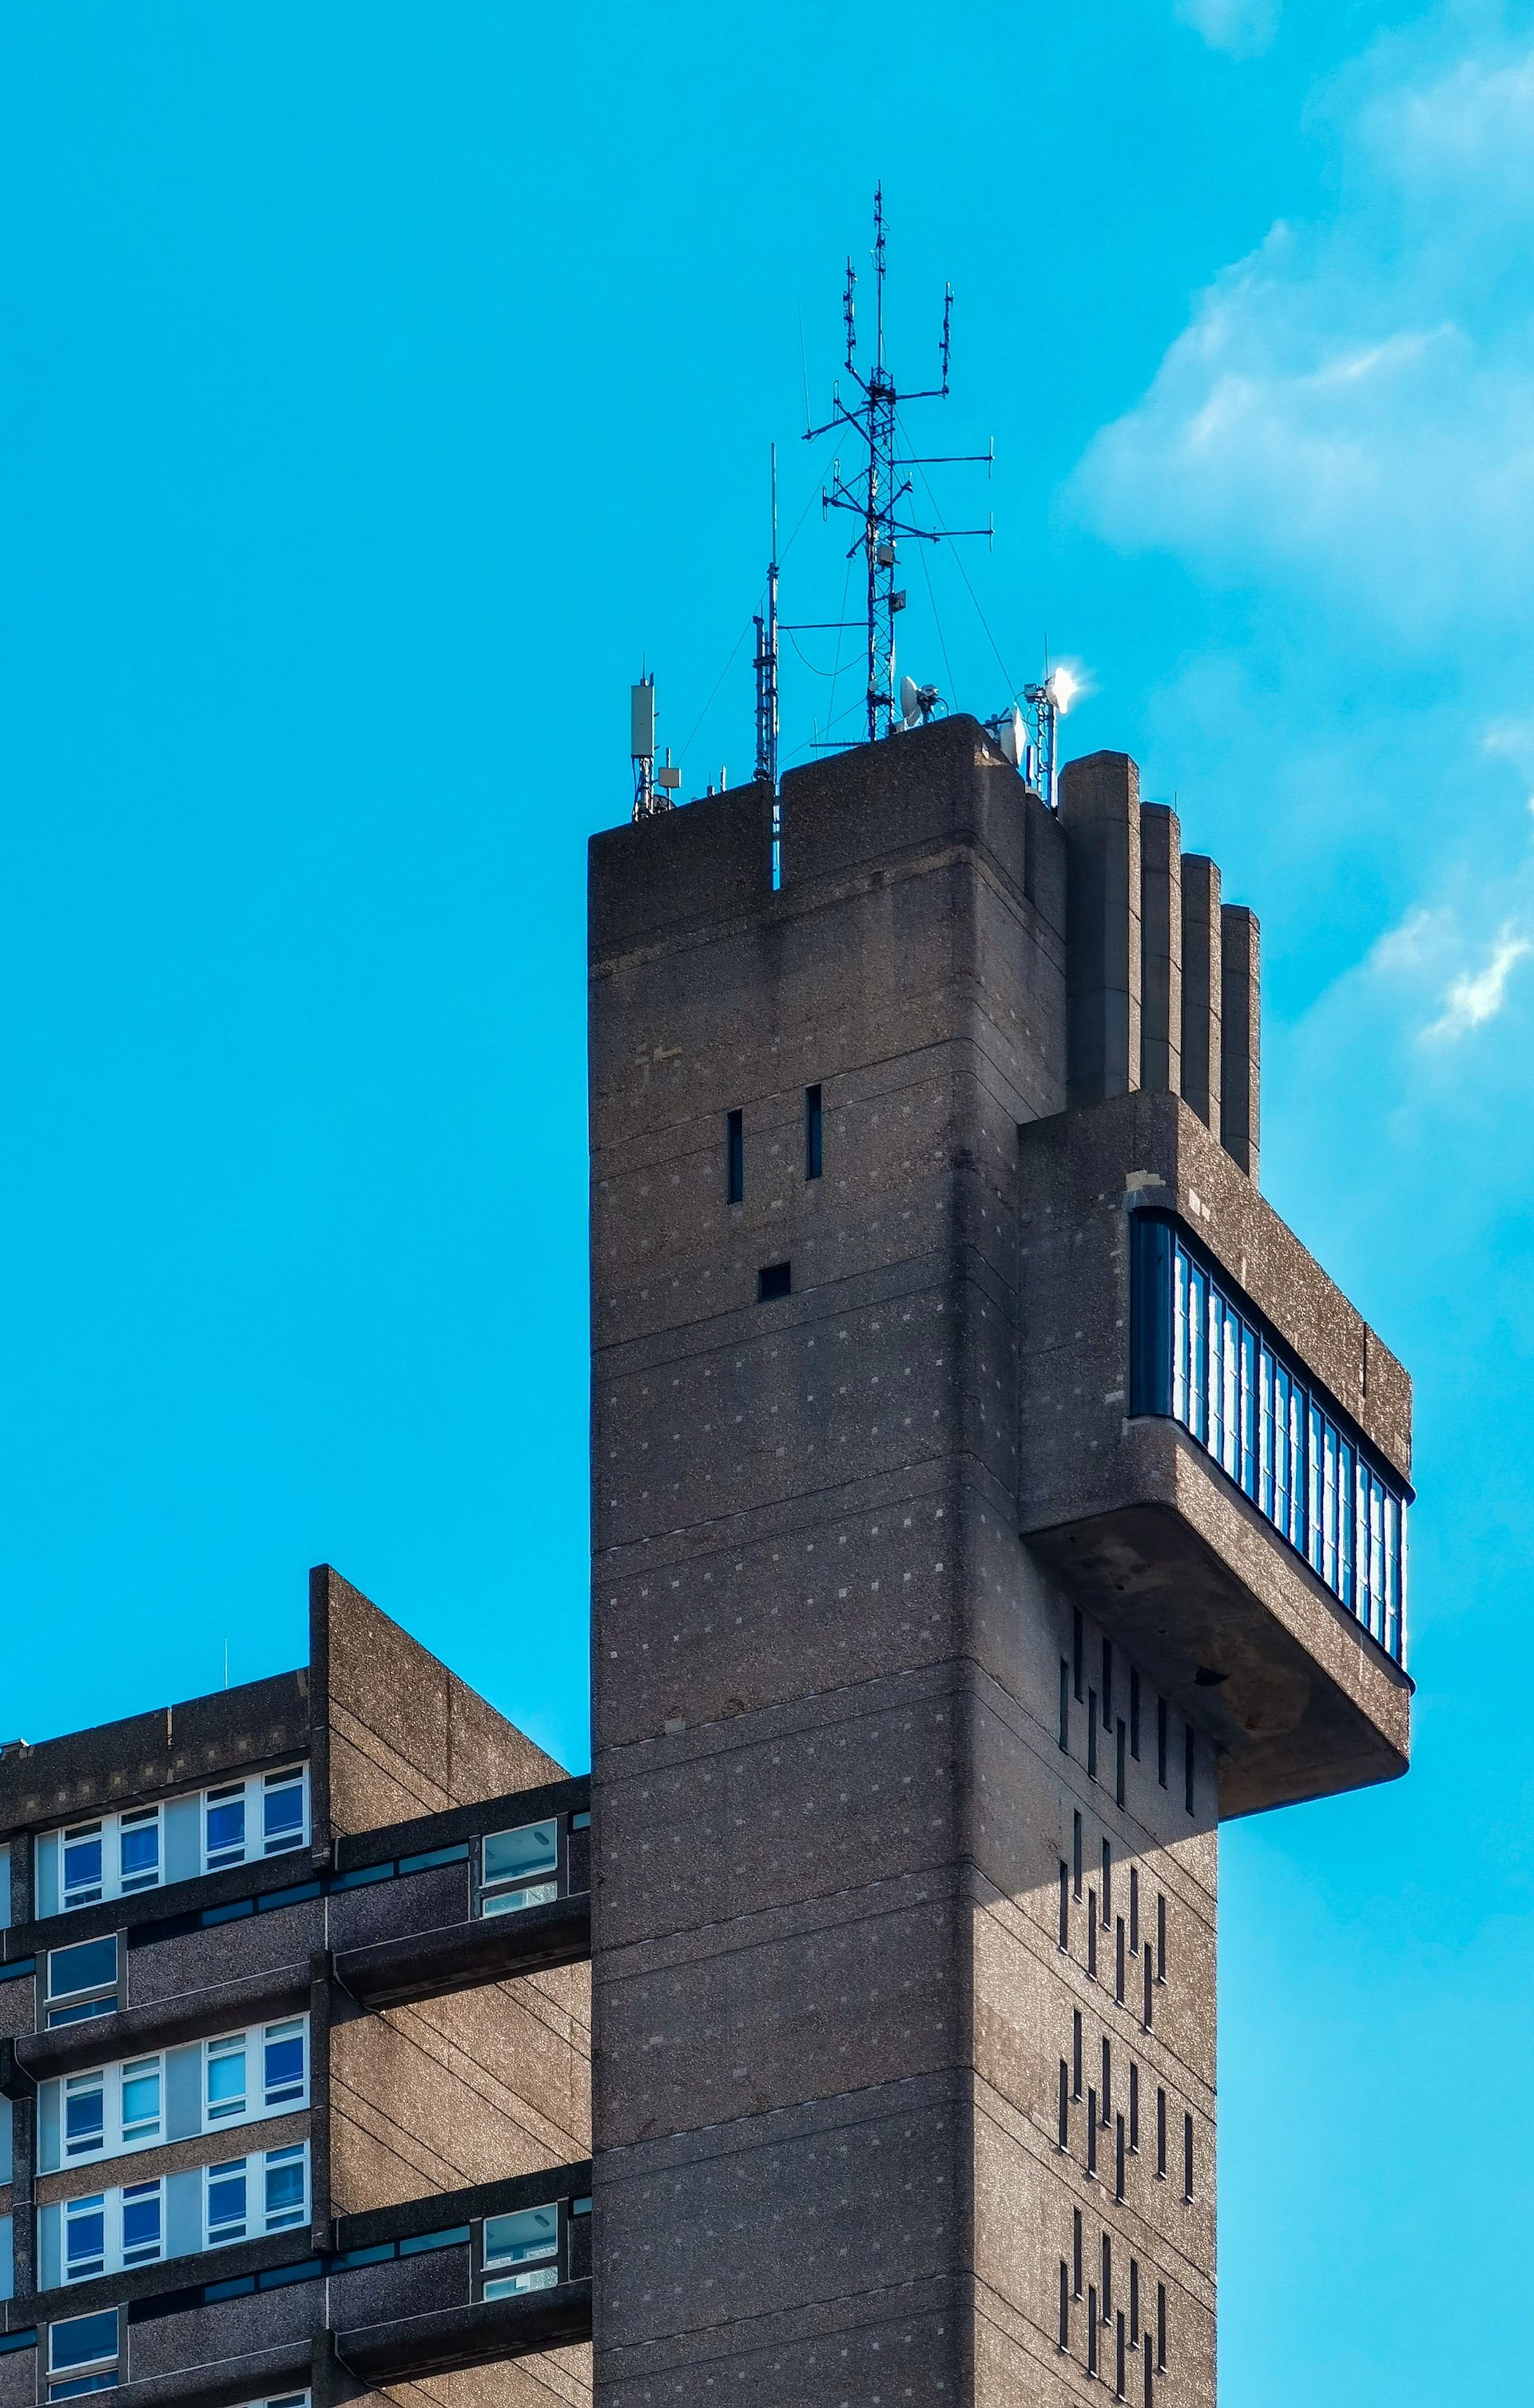 Yet another brutalist building - picture provided by Unsplash